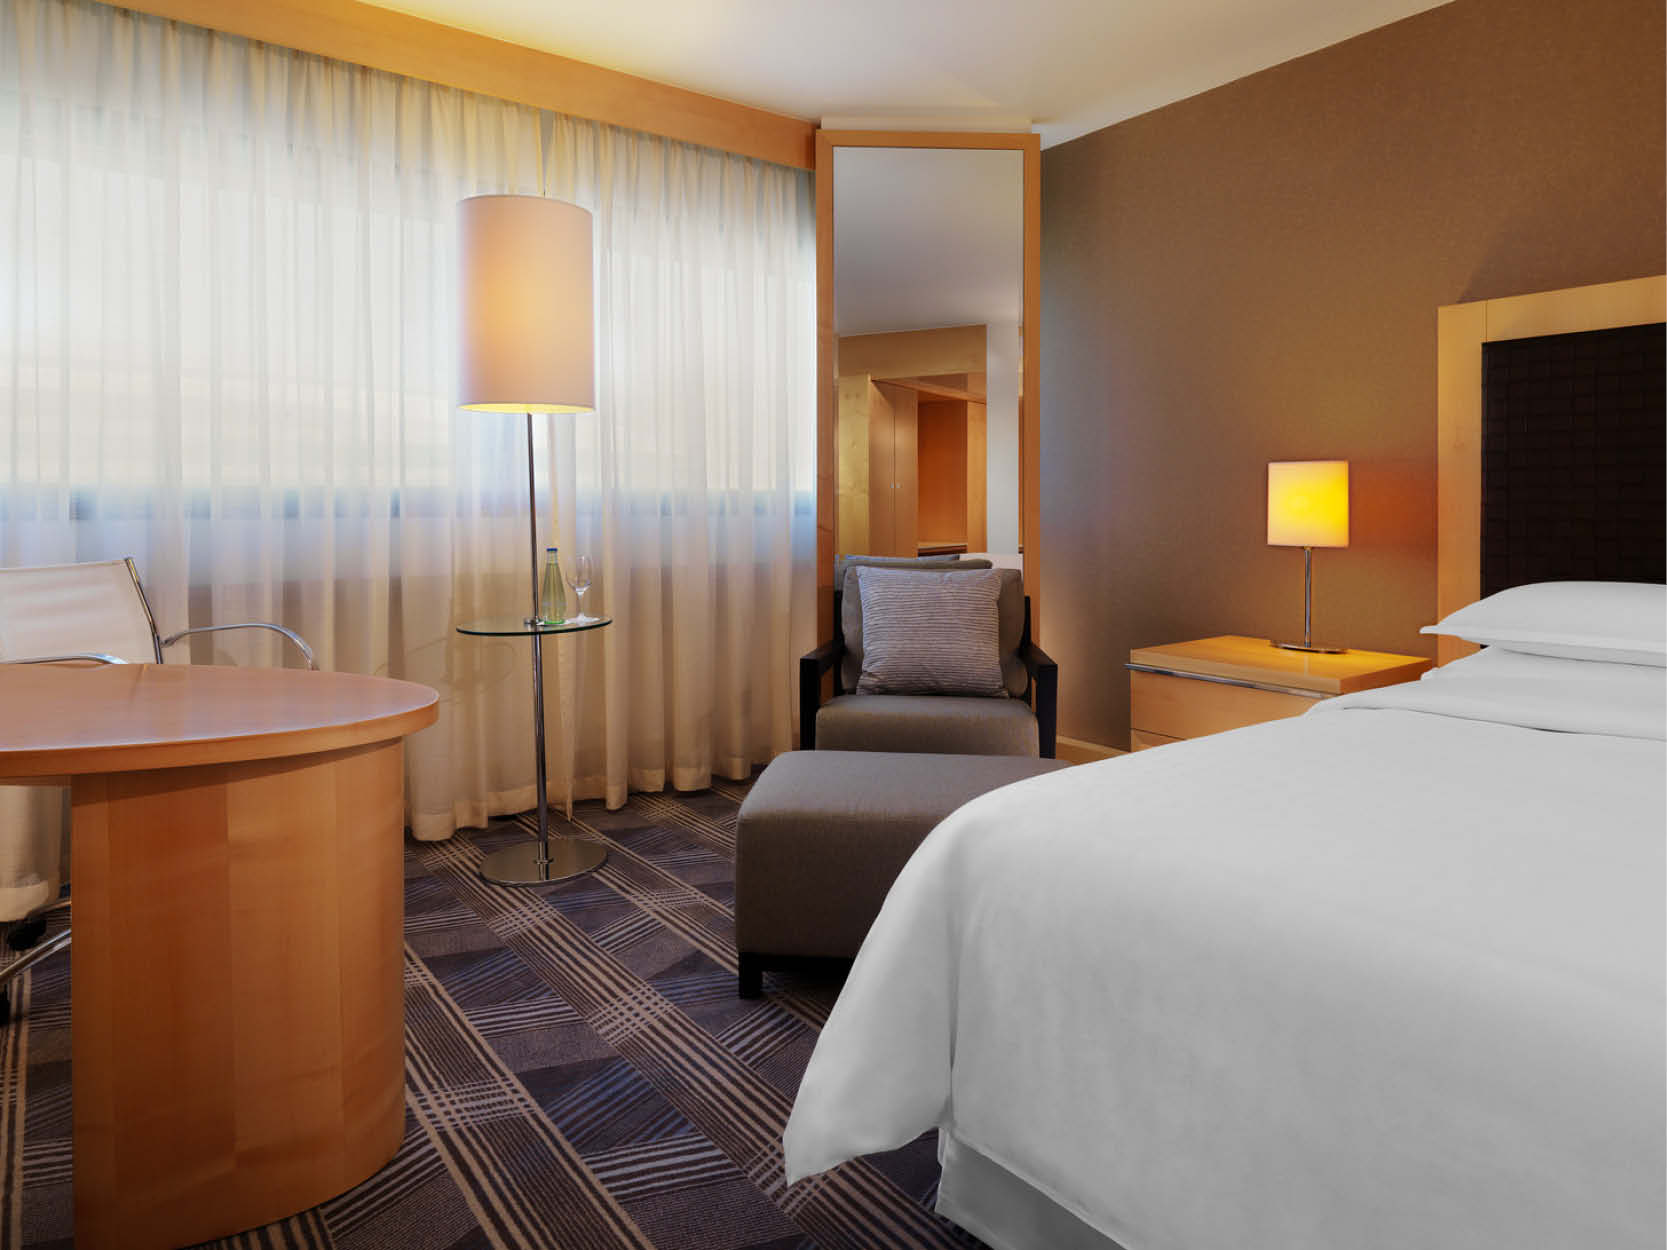 standard bedroom - hotel sheraton airport and conference ctr - frankfurt, germany